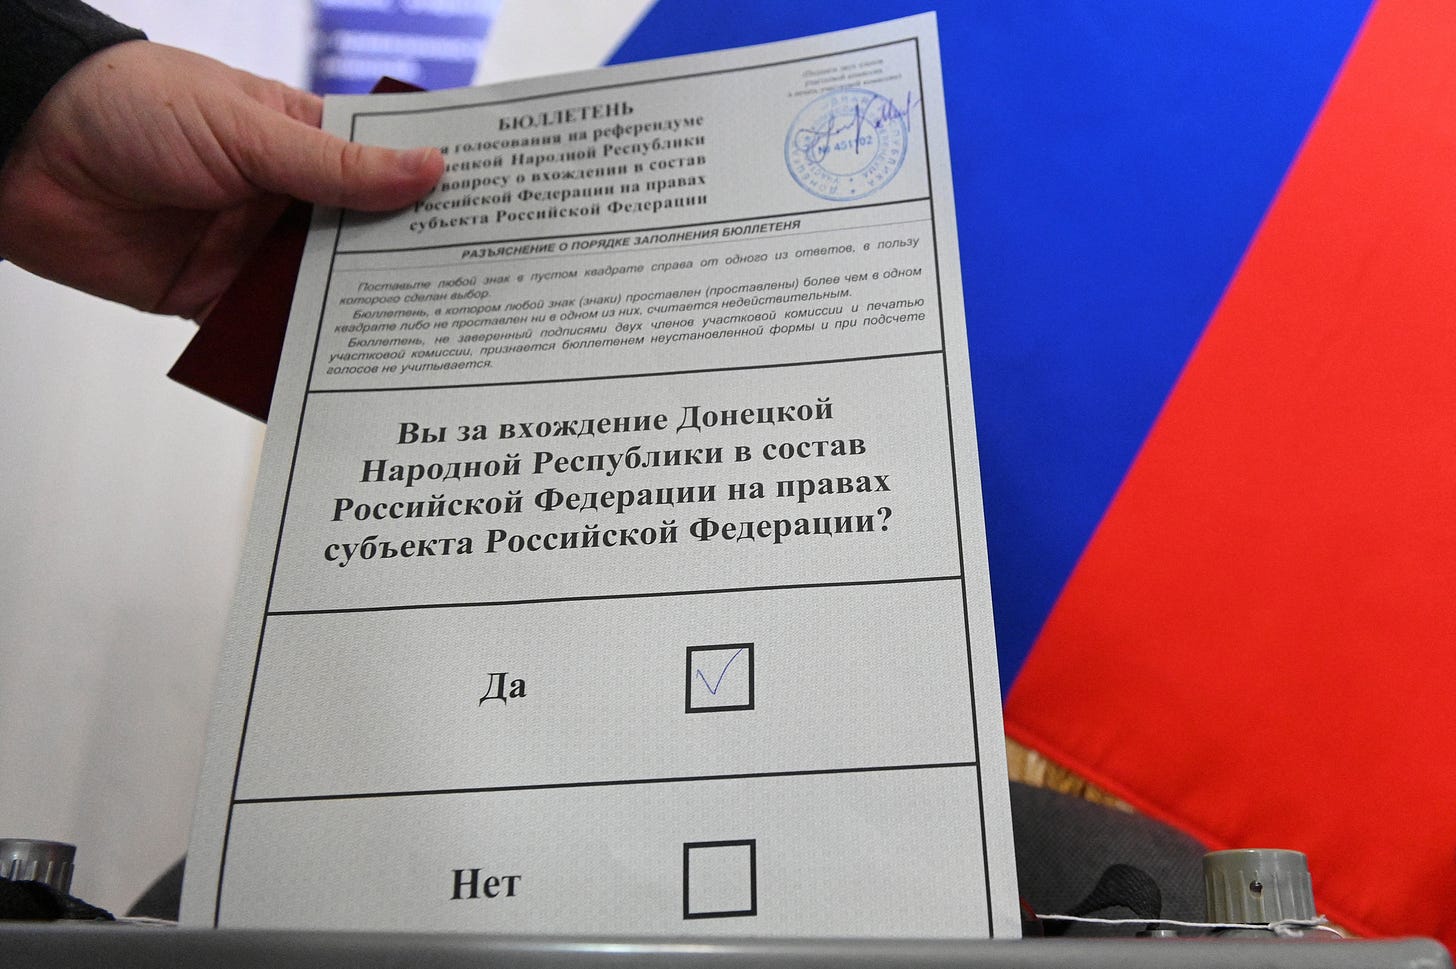 Referendum on joining of Russian-controlled regions of Ukraine to Russia in Rostov-on-Don